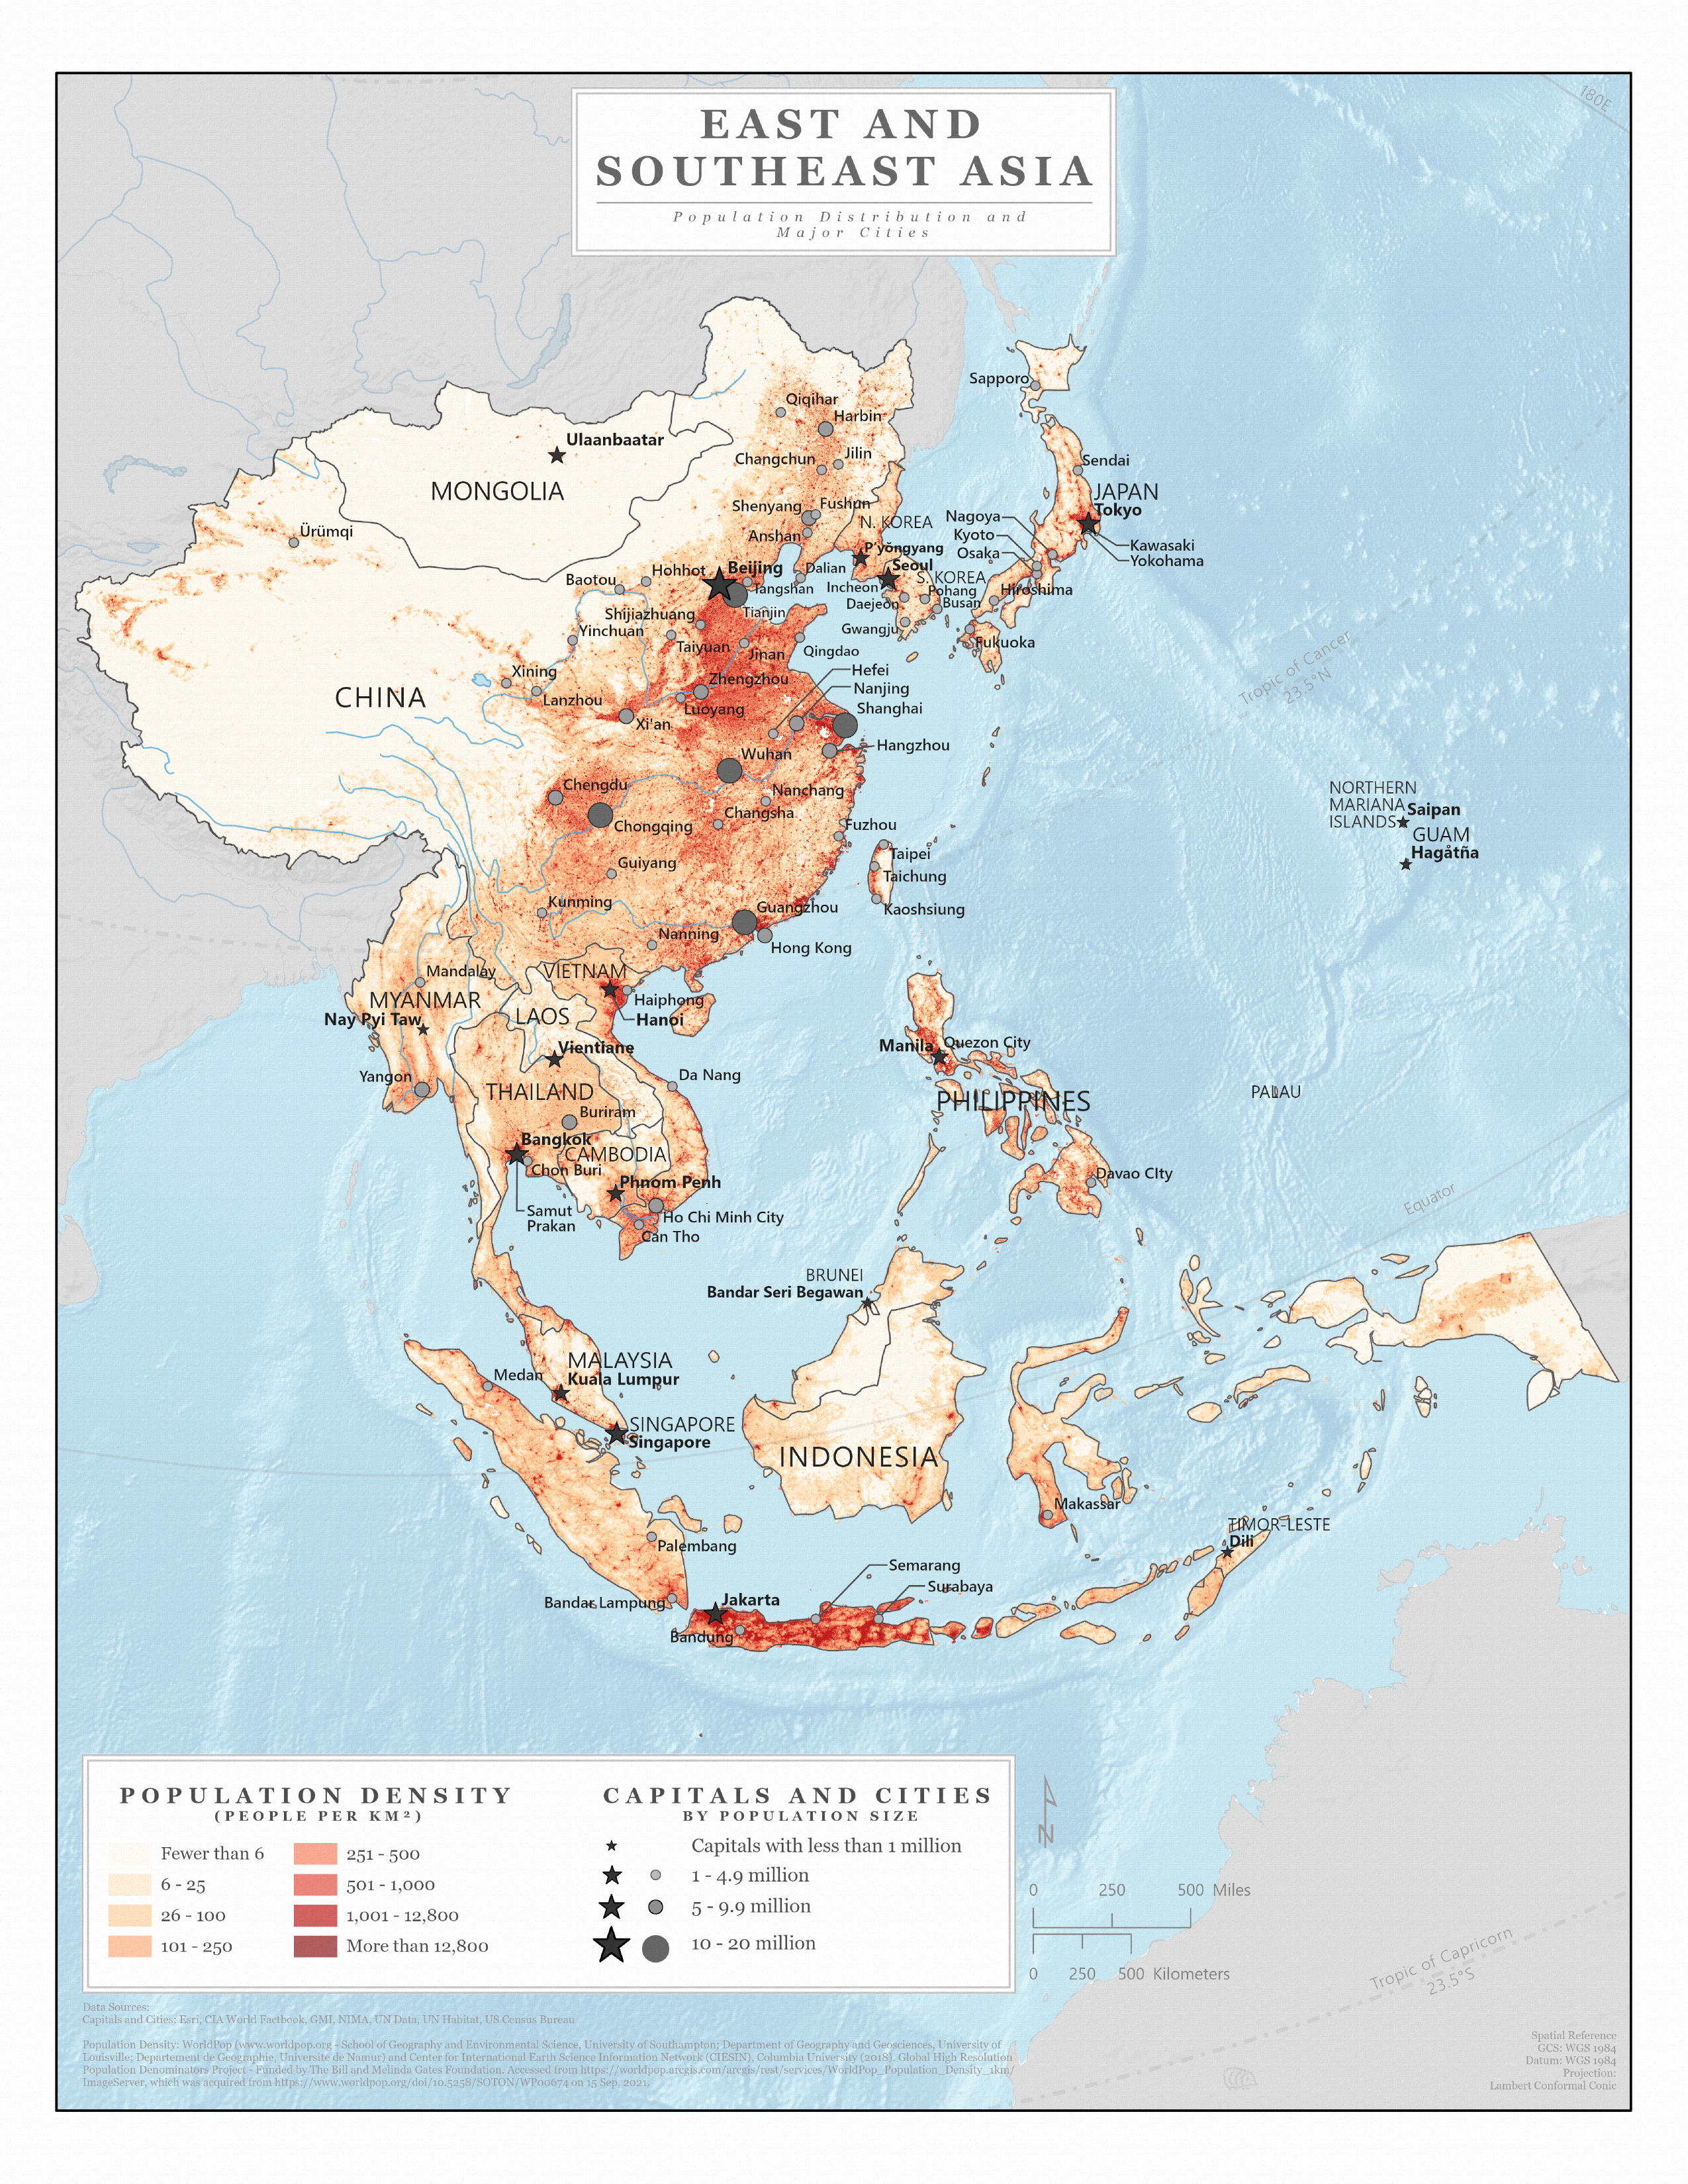 Countries, capitals, and population sizes of East and Southeast Asia